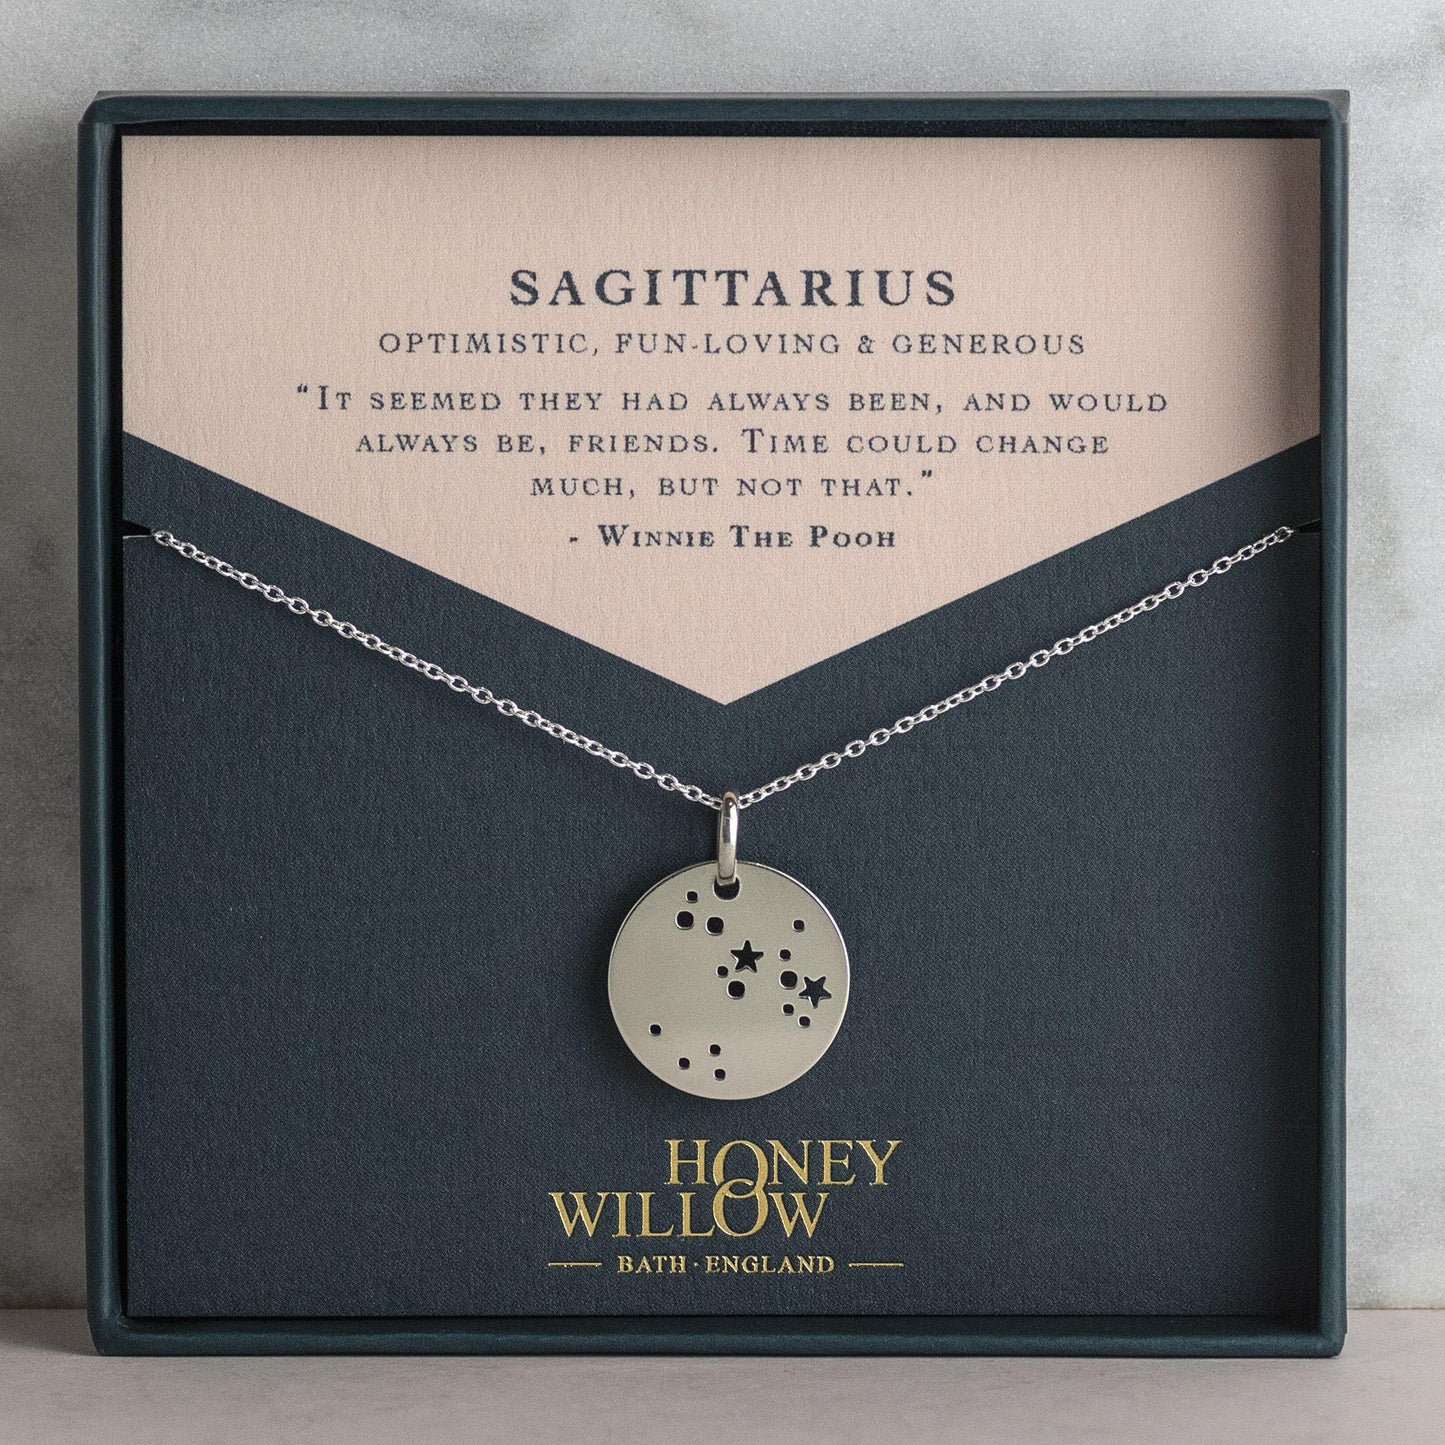 Honey Willow constellation necklace